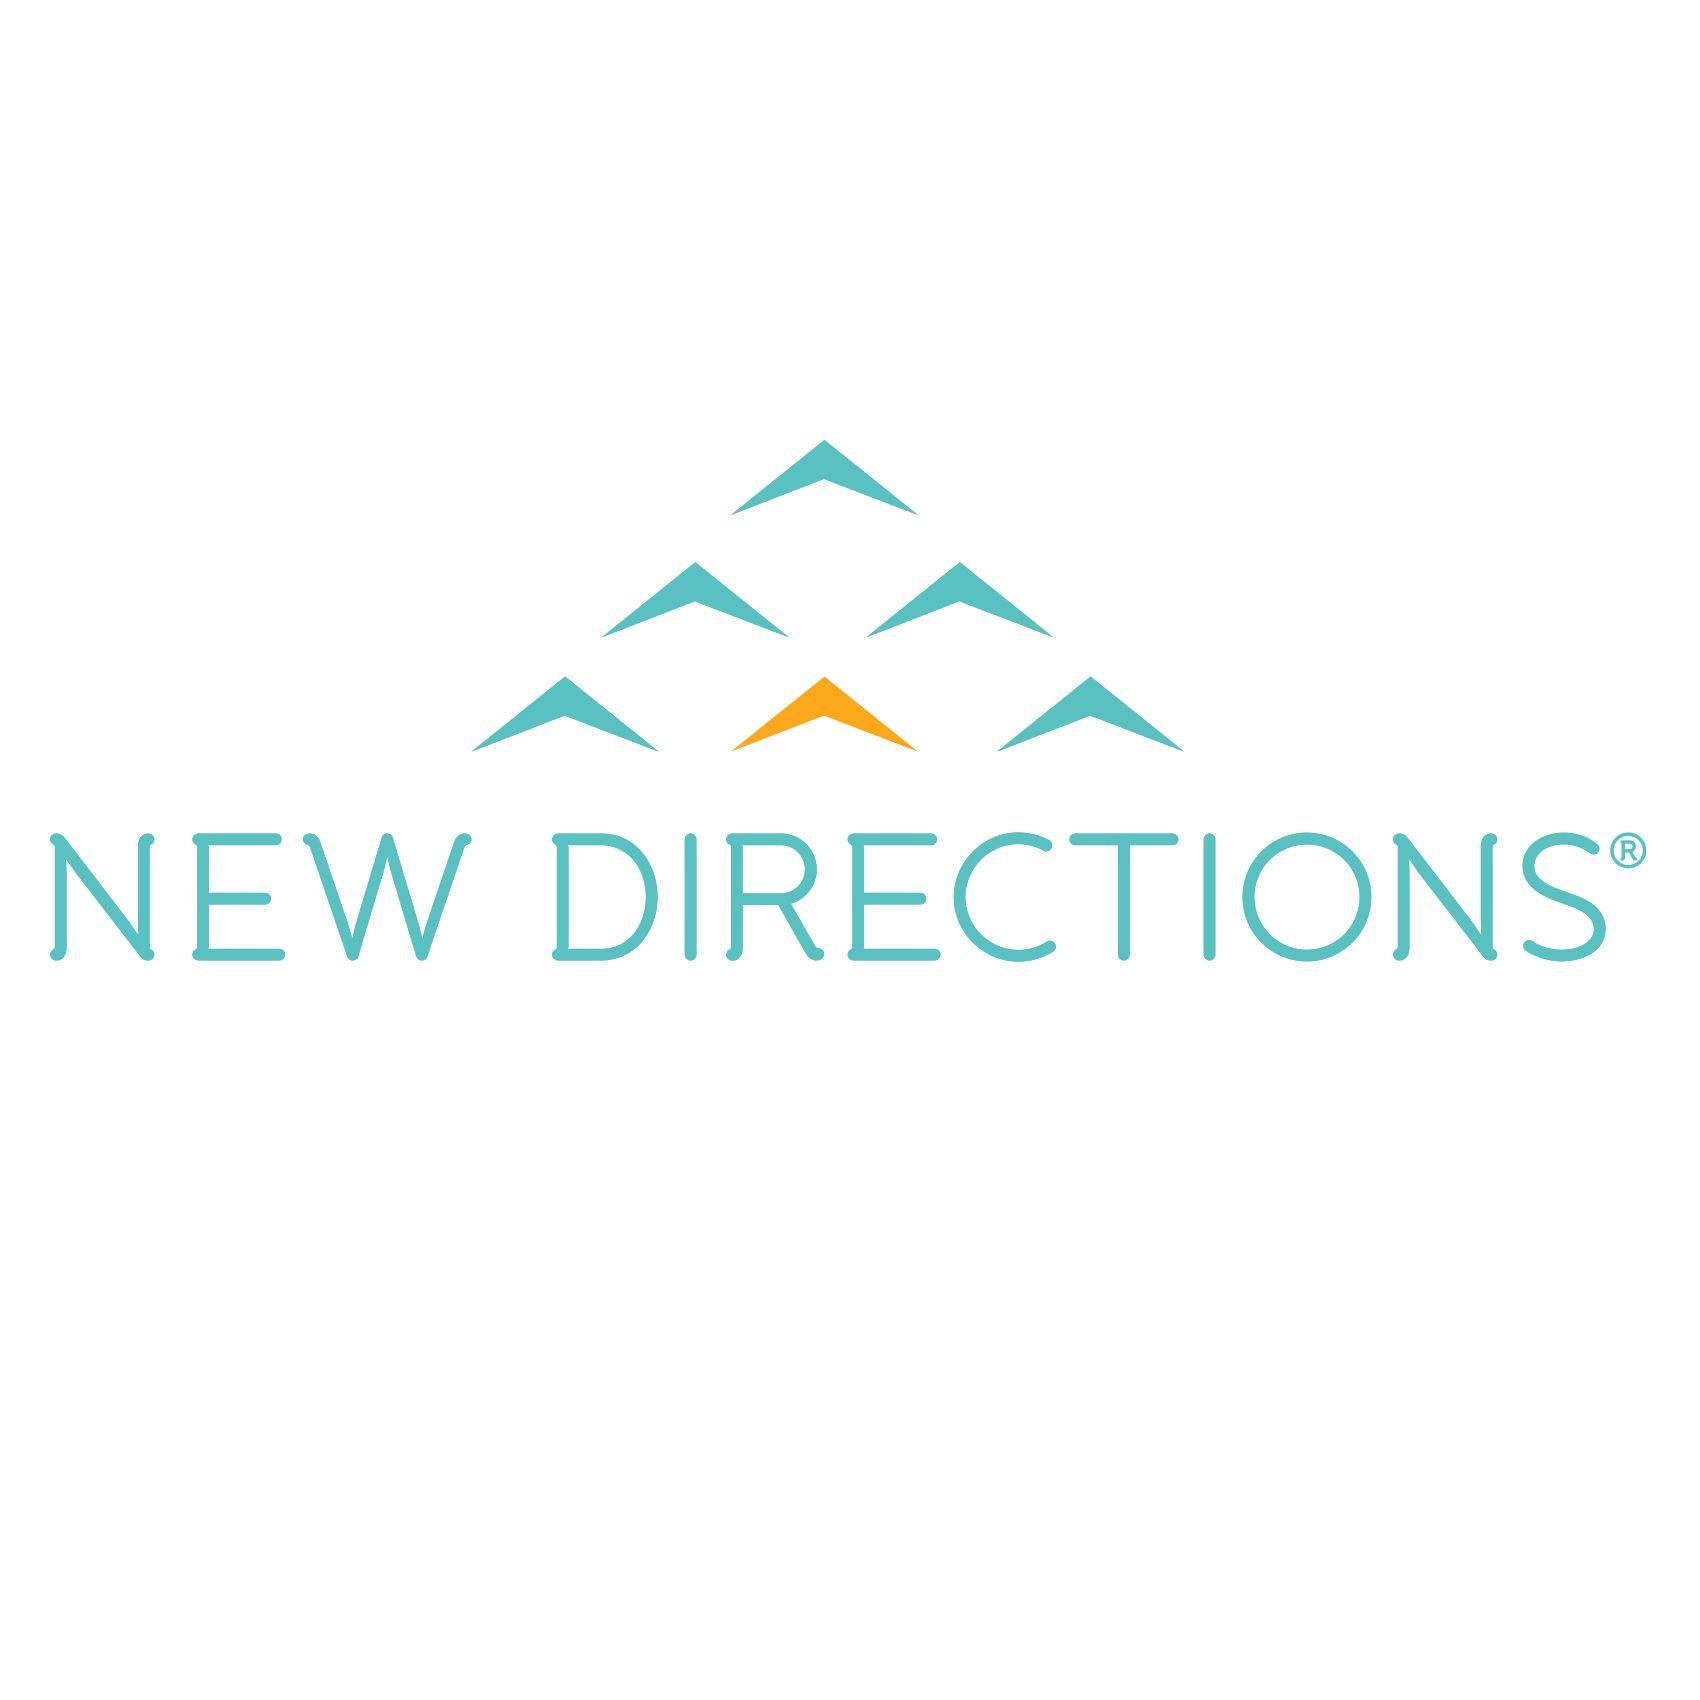 EAP Logo - New Directions EAP Logo | Traverse City Area Chamber of Commerce